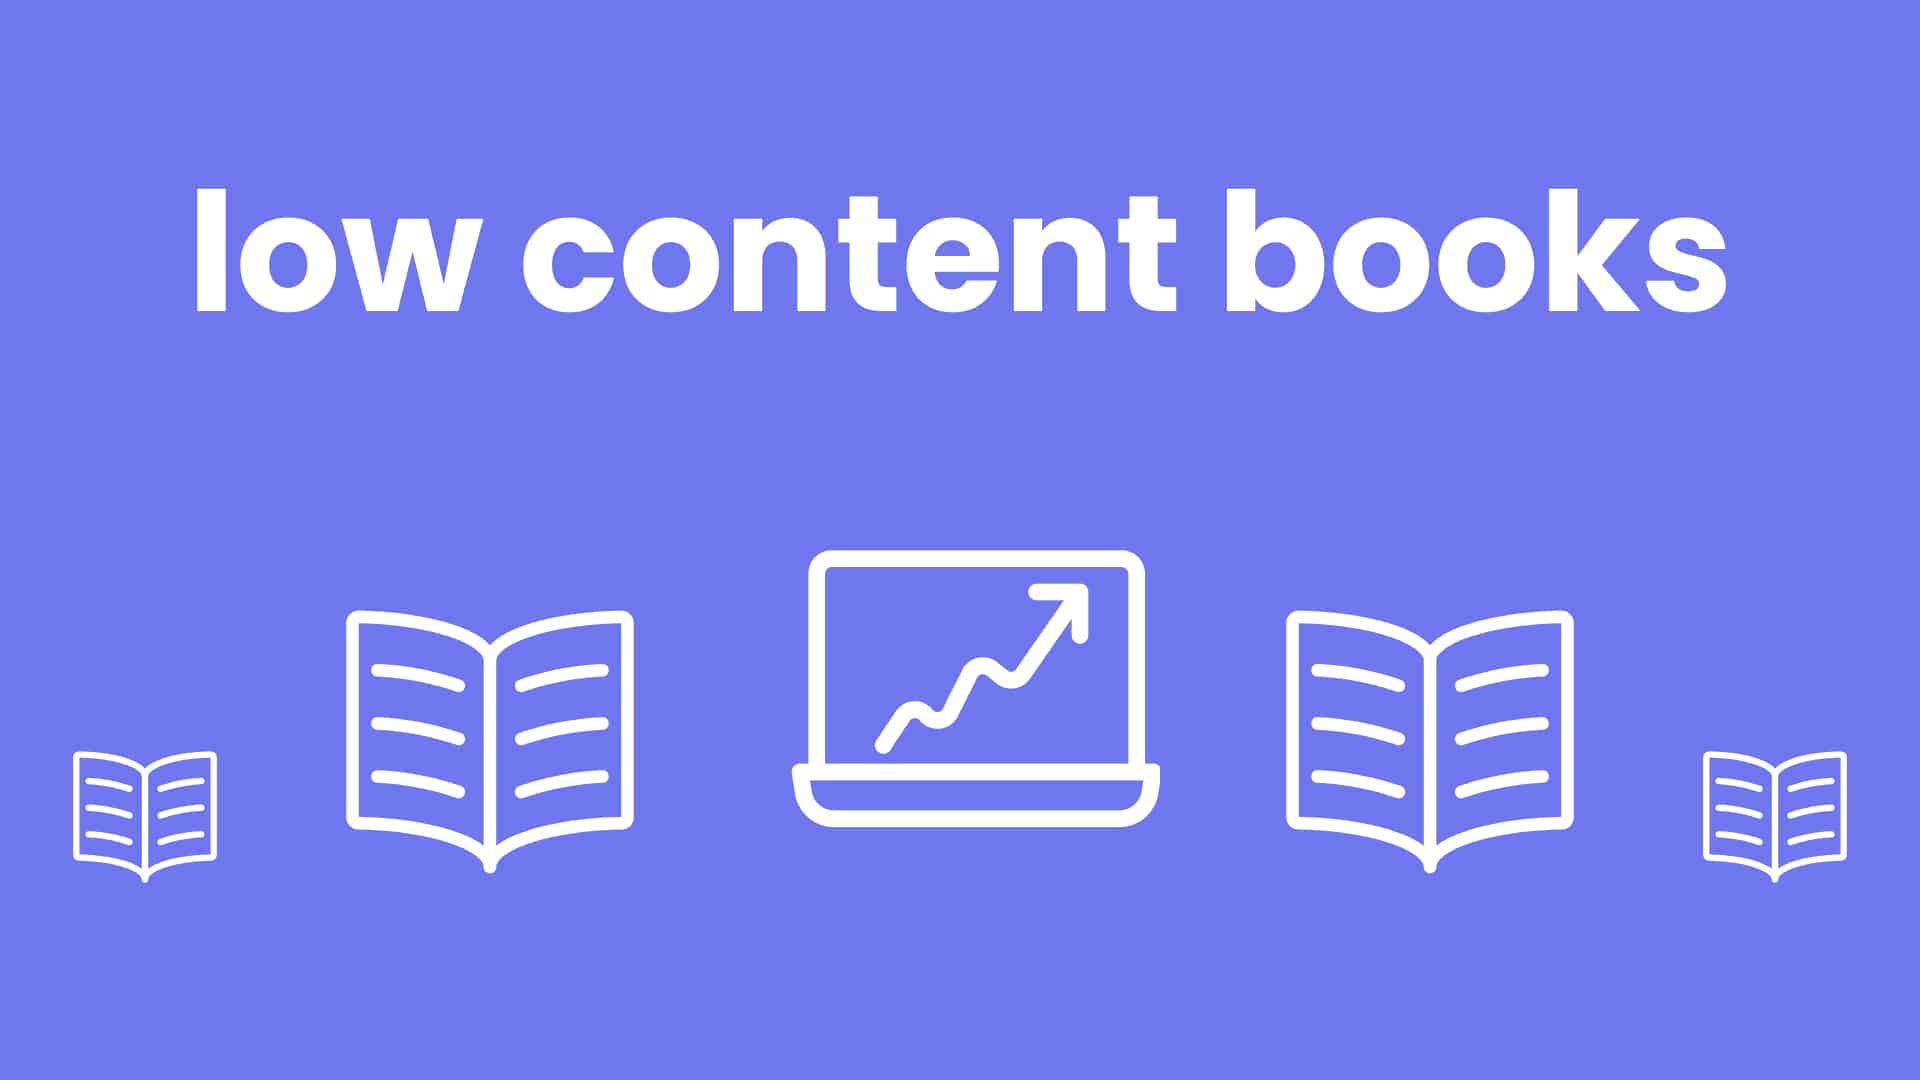 14 Best Low Content Books Ideas for Amazon KDP Insight.ng